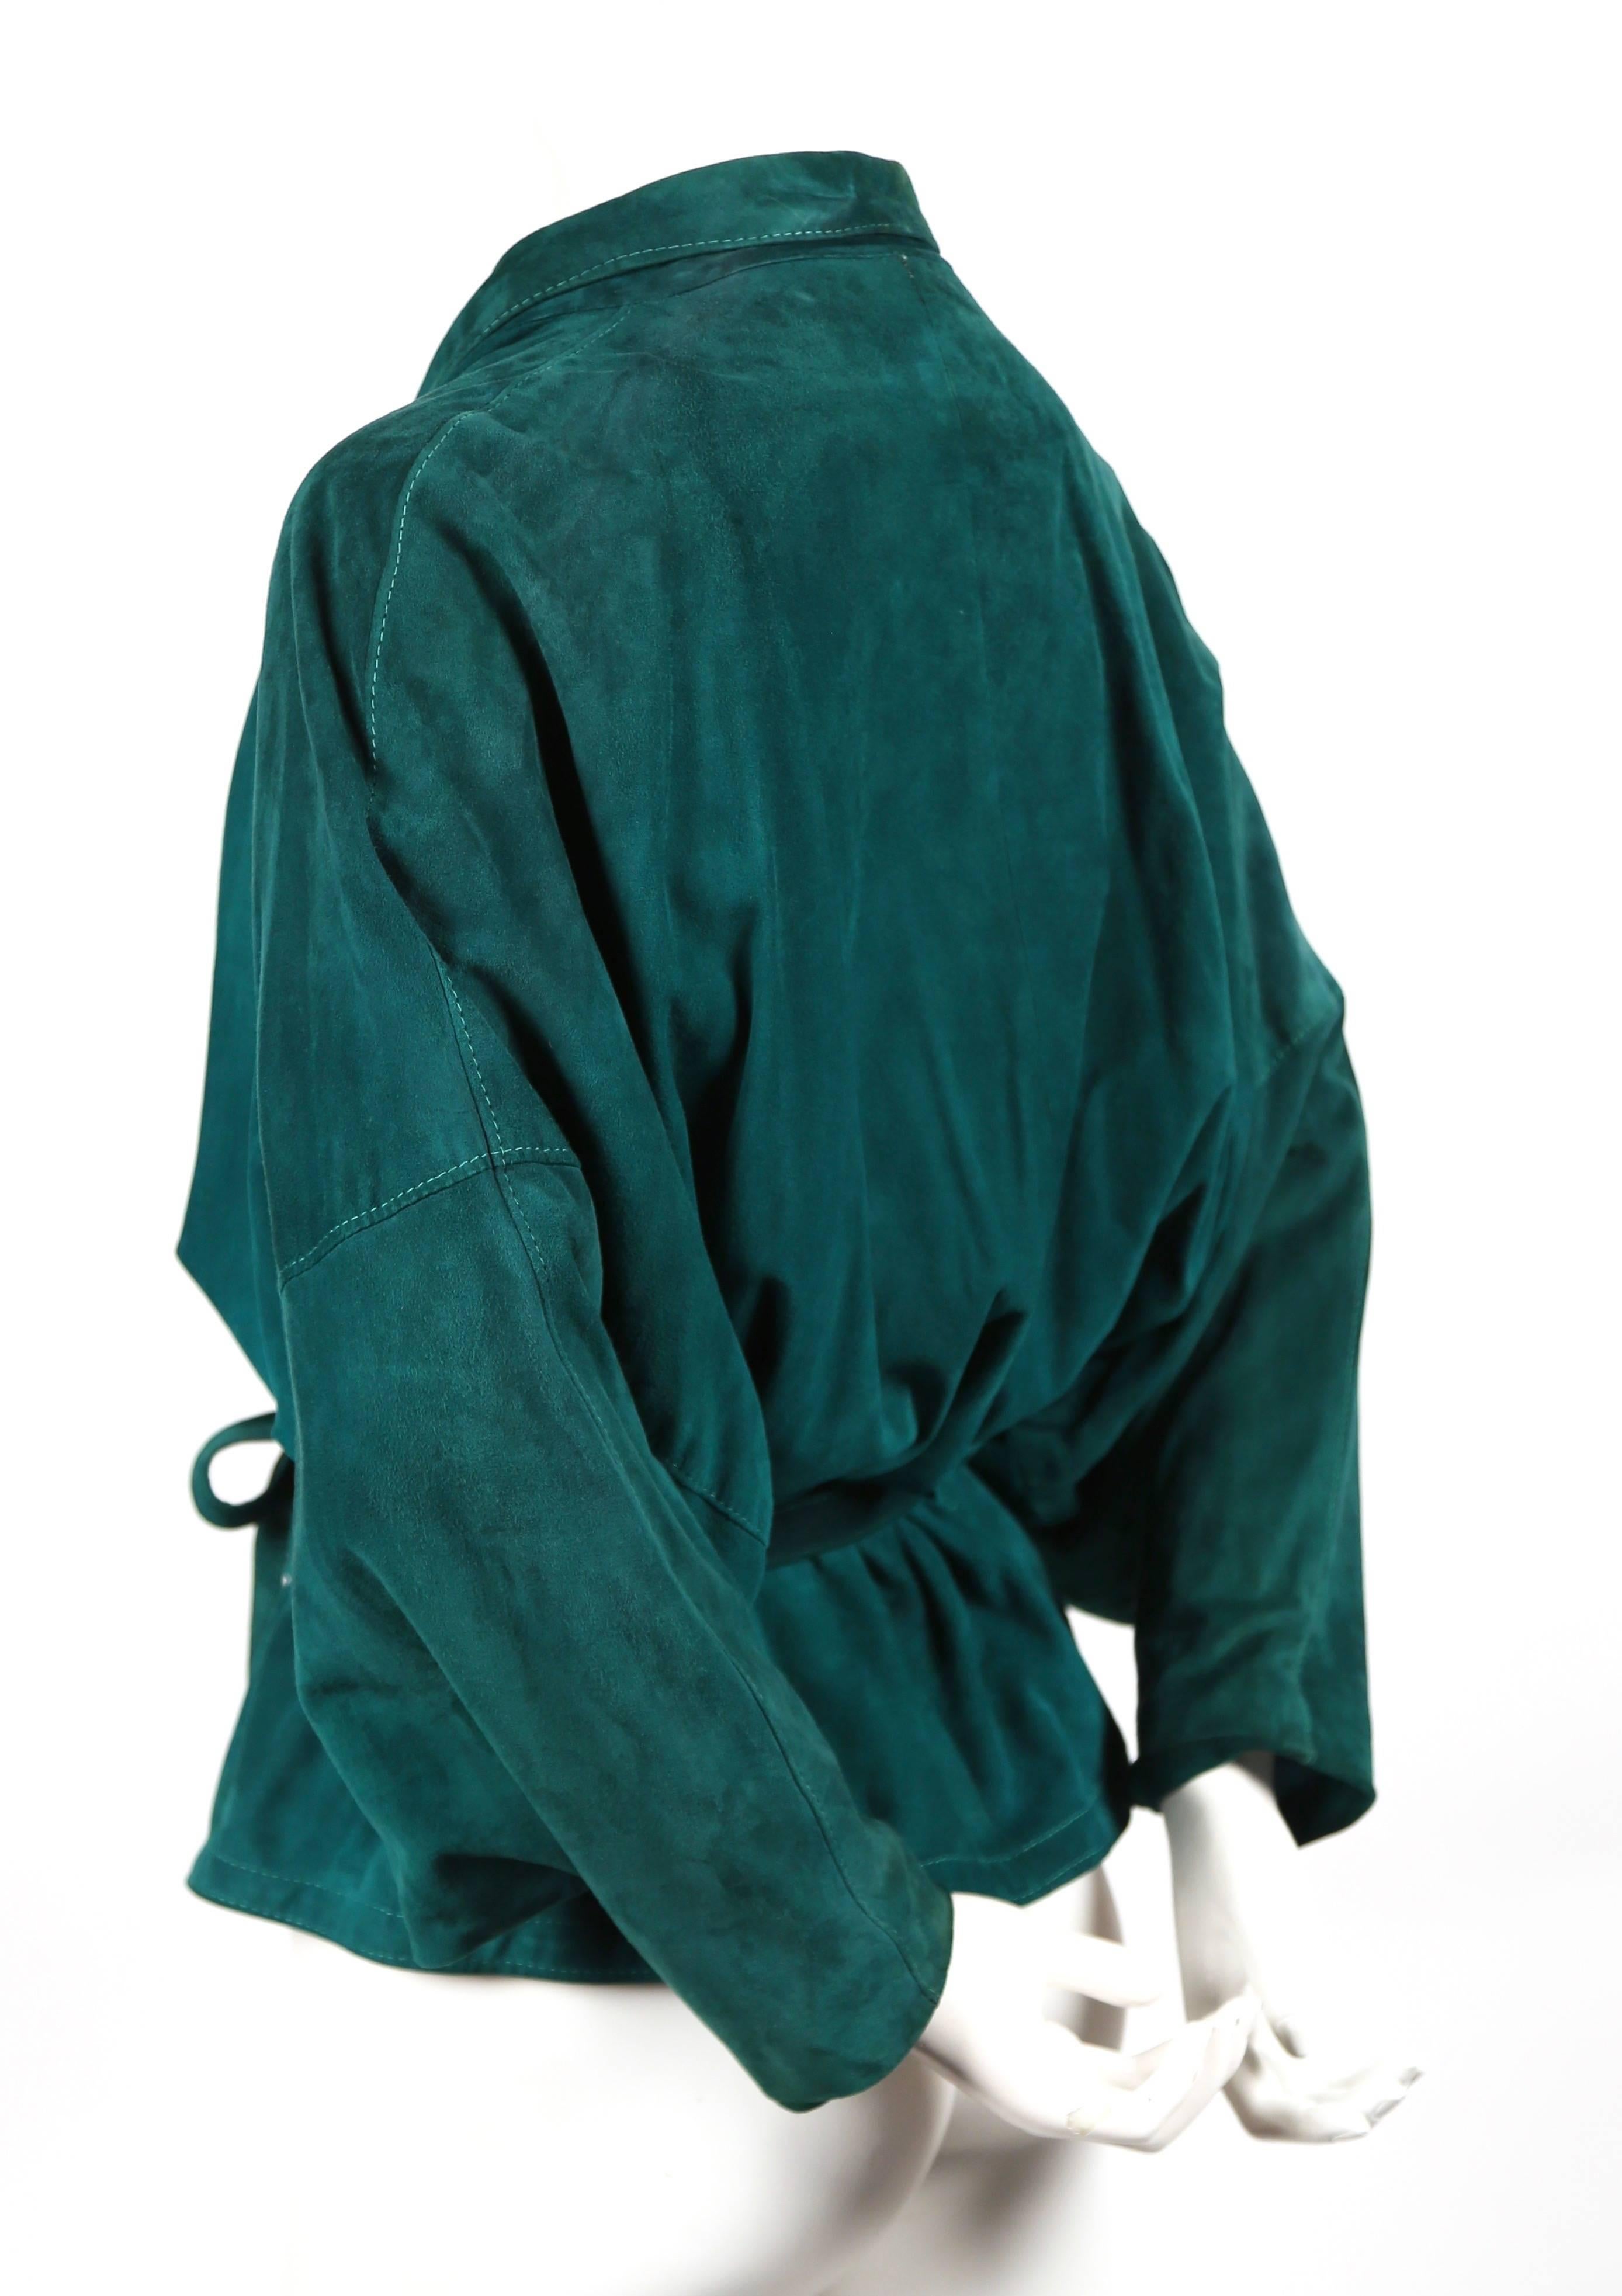 Emerald green draped suede jacket with wrap closure from Jean-Claude Jitrois dating to the early 1980's. Fits a size 4 to 8. Fully lined. Wrap, belt closure. Made in France. Good condition.
